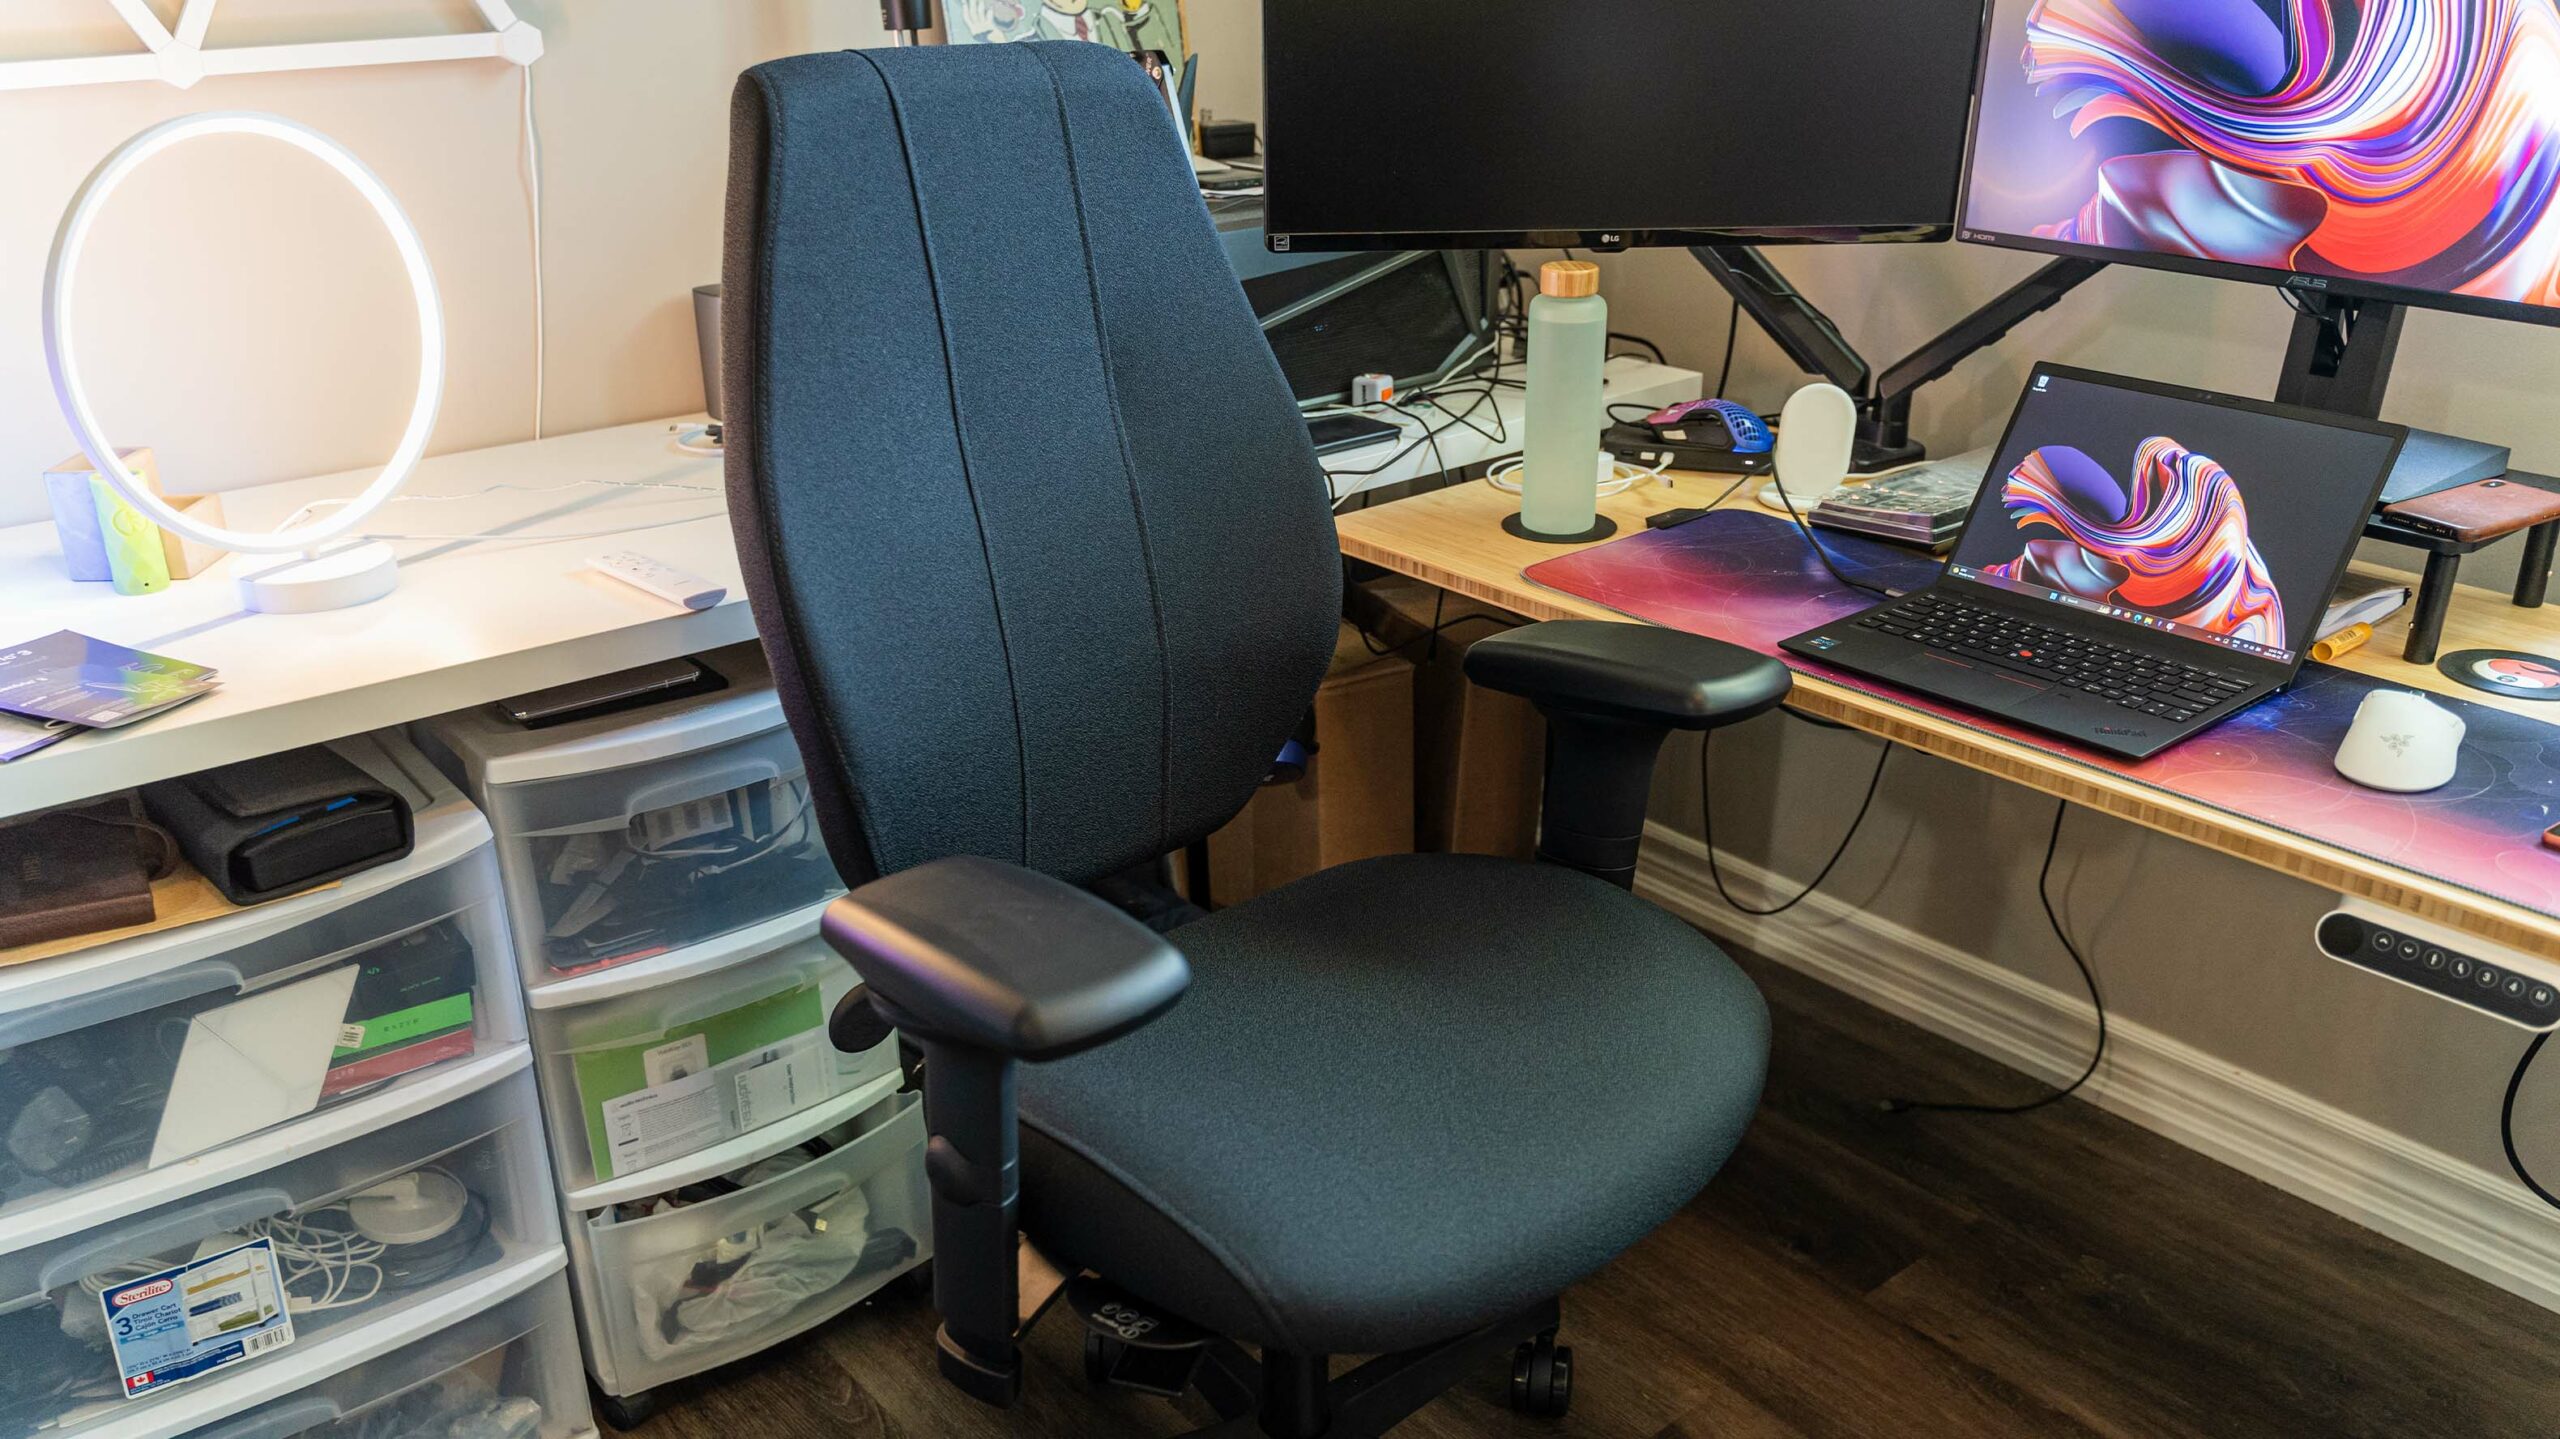 Staples-exclusive airCentric 3 chair brought improved ergonomics to my home office